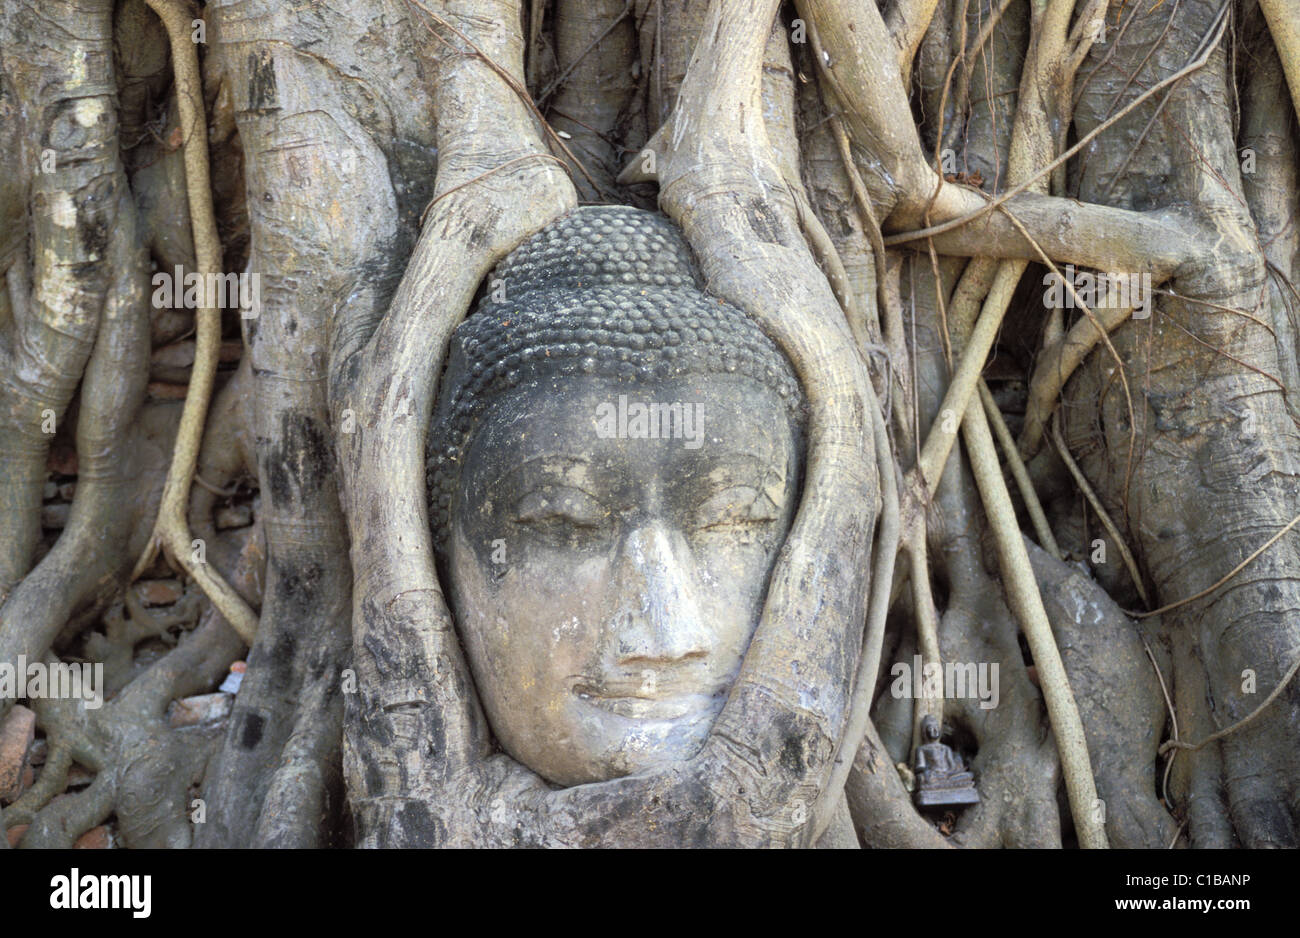 Thailand, Ayutthaya province, historical park, Wat Phra Mahathat, a Buddha head covered by the roots of a tree Stock Photo